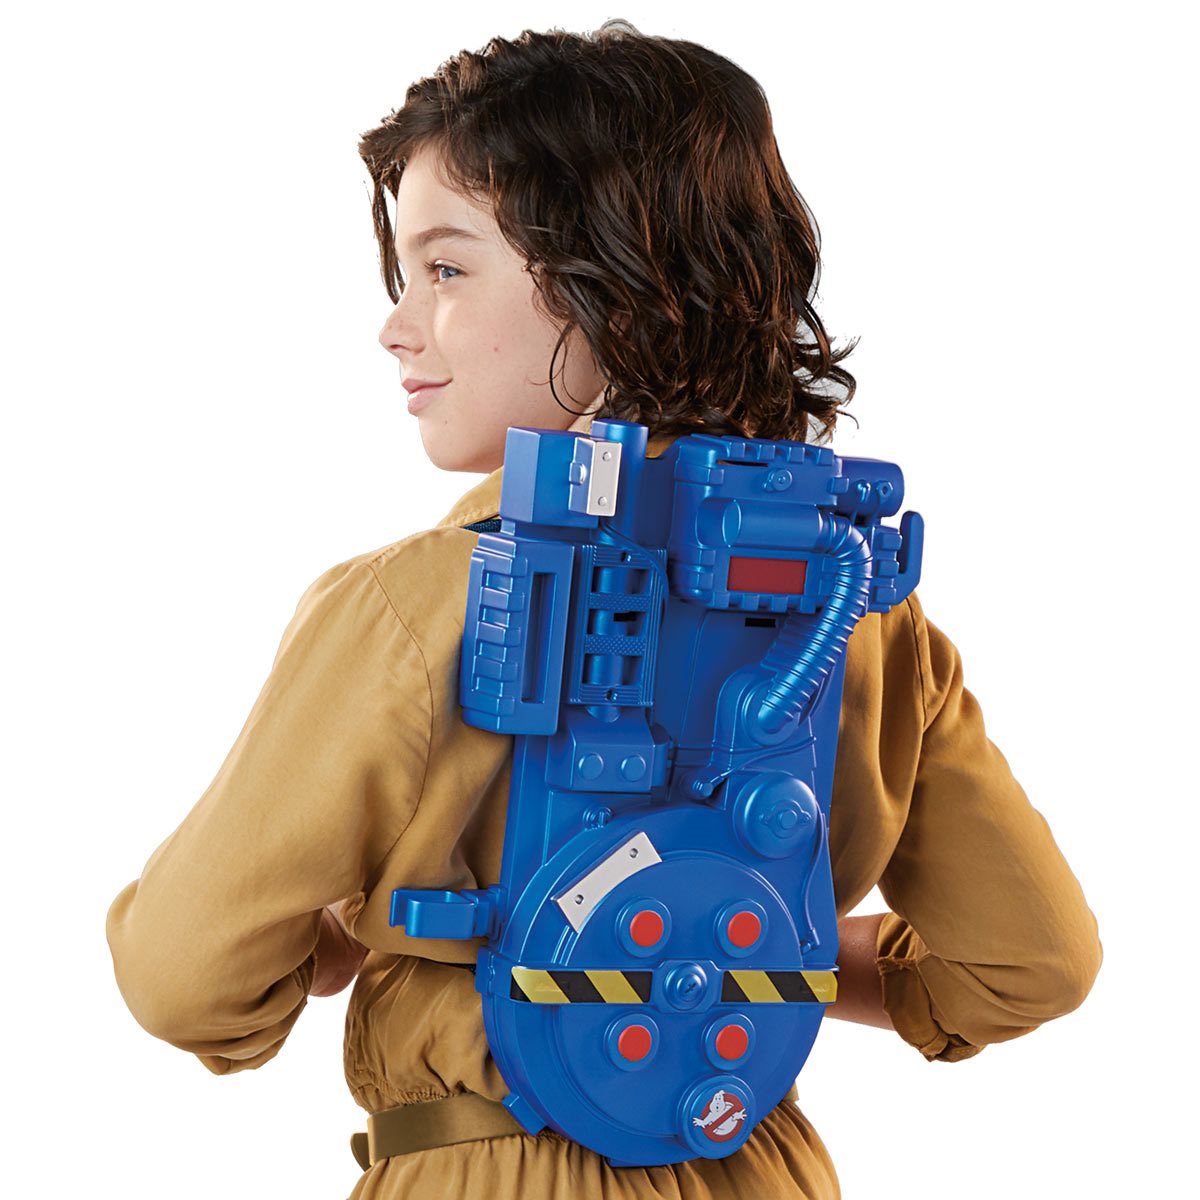 Ghostbusters: Afterlife Proton Pack Toy - Entertainment Earth Ghostbusters Toy